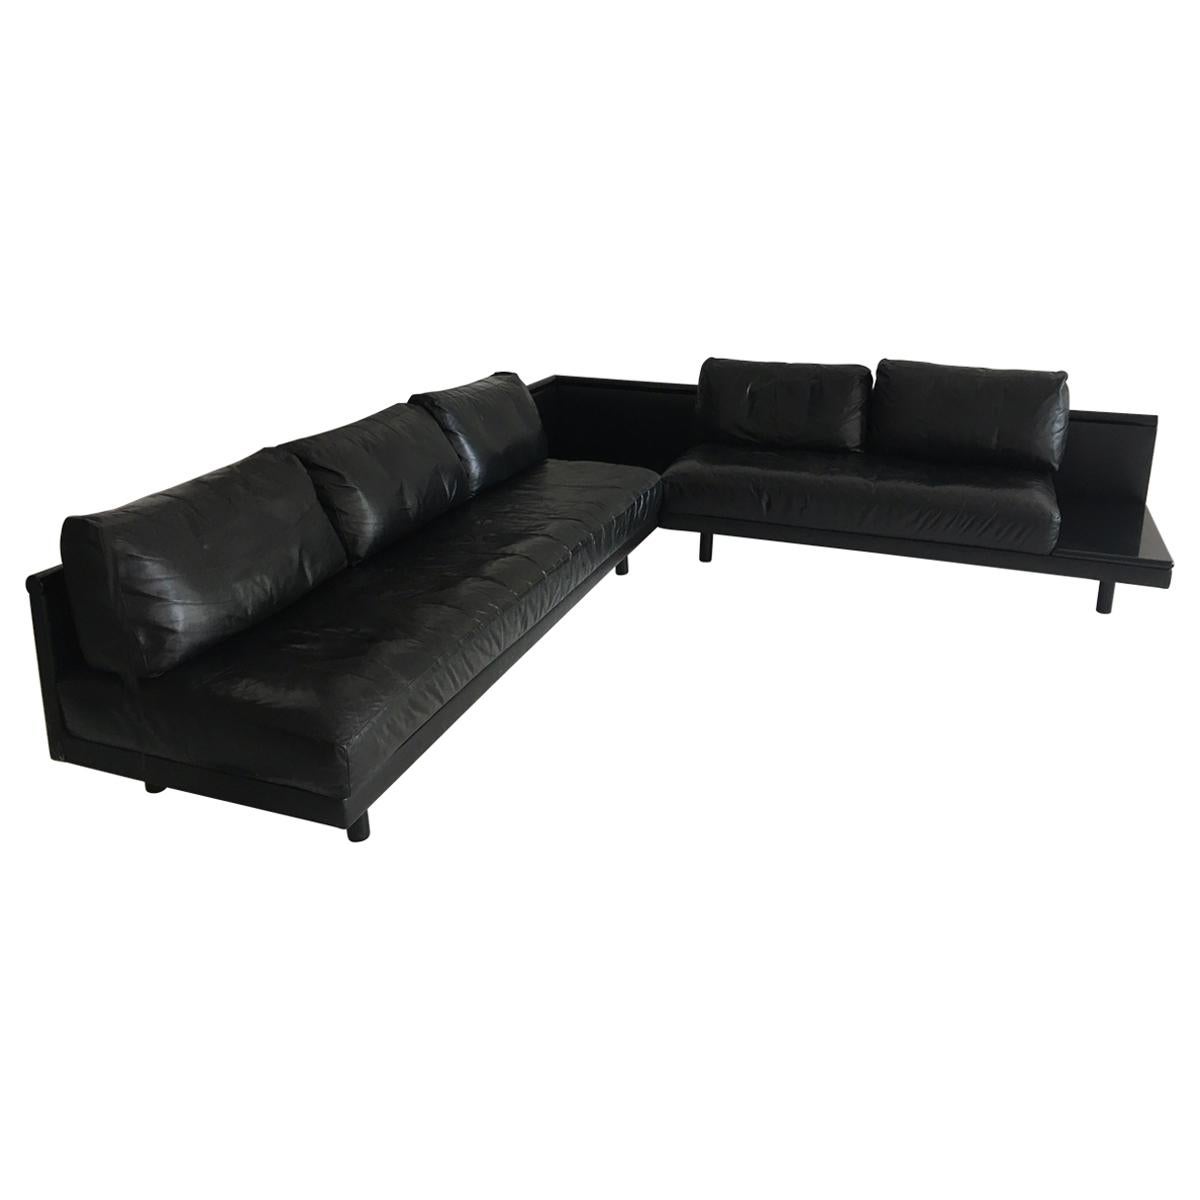 Dino Gavina Sofa Suite Black Leather Sectional, Living Room Suite, Italy, 1960 For Sale